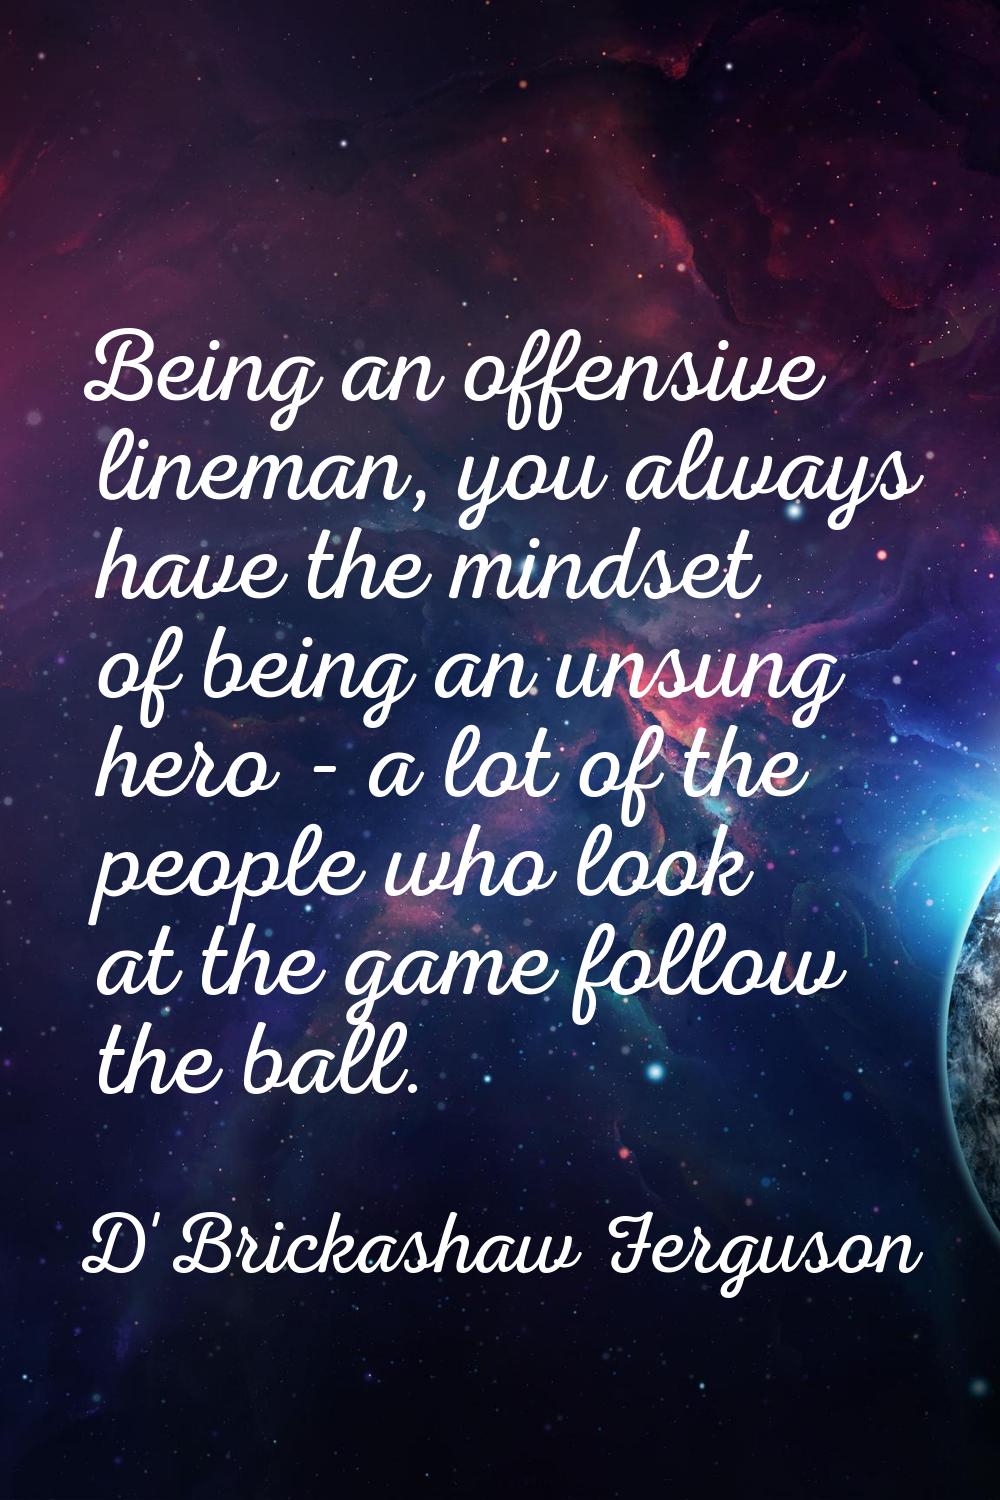 Being an offensive lineman, you always have the mindset of being an unsung hero - a lot of the peop